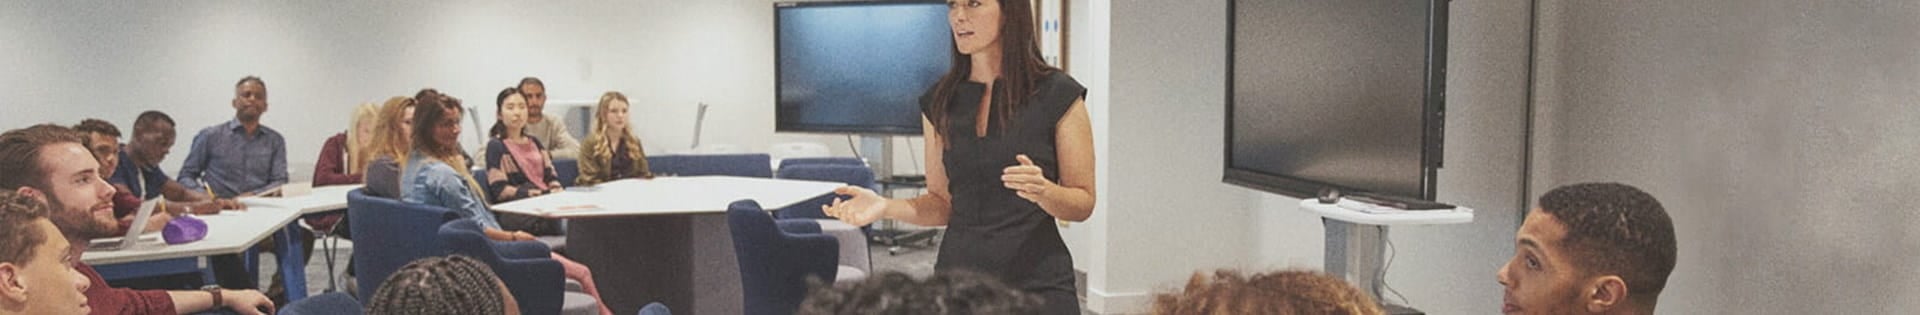 female teacher lecturing students about teaching curriculum in classroom